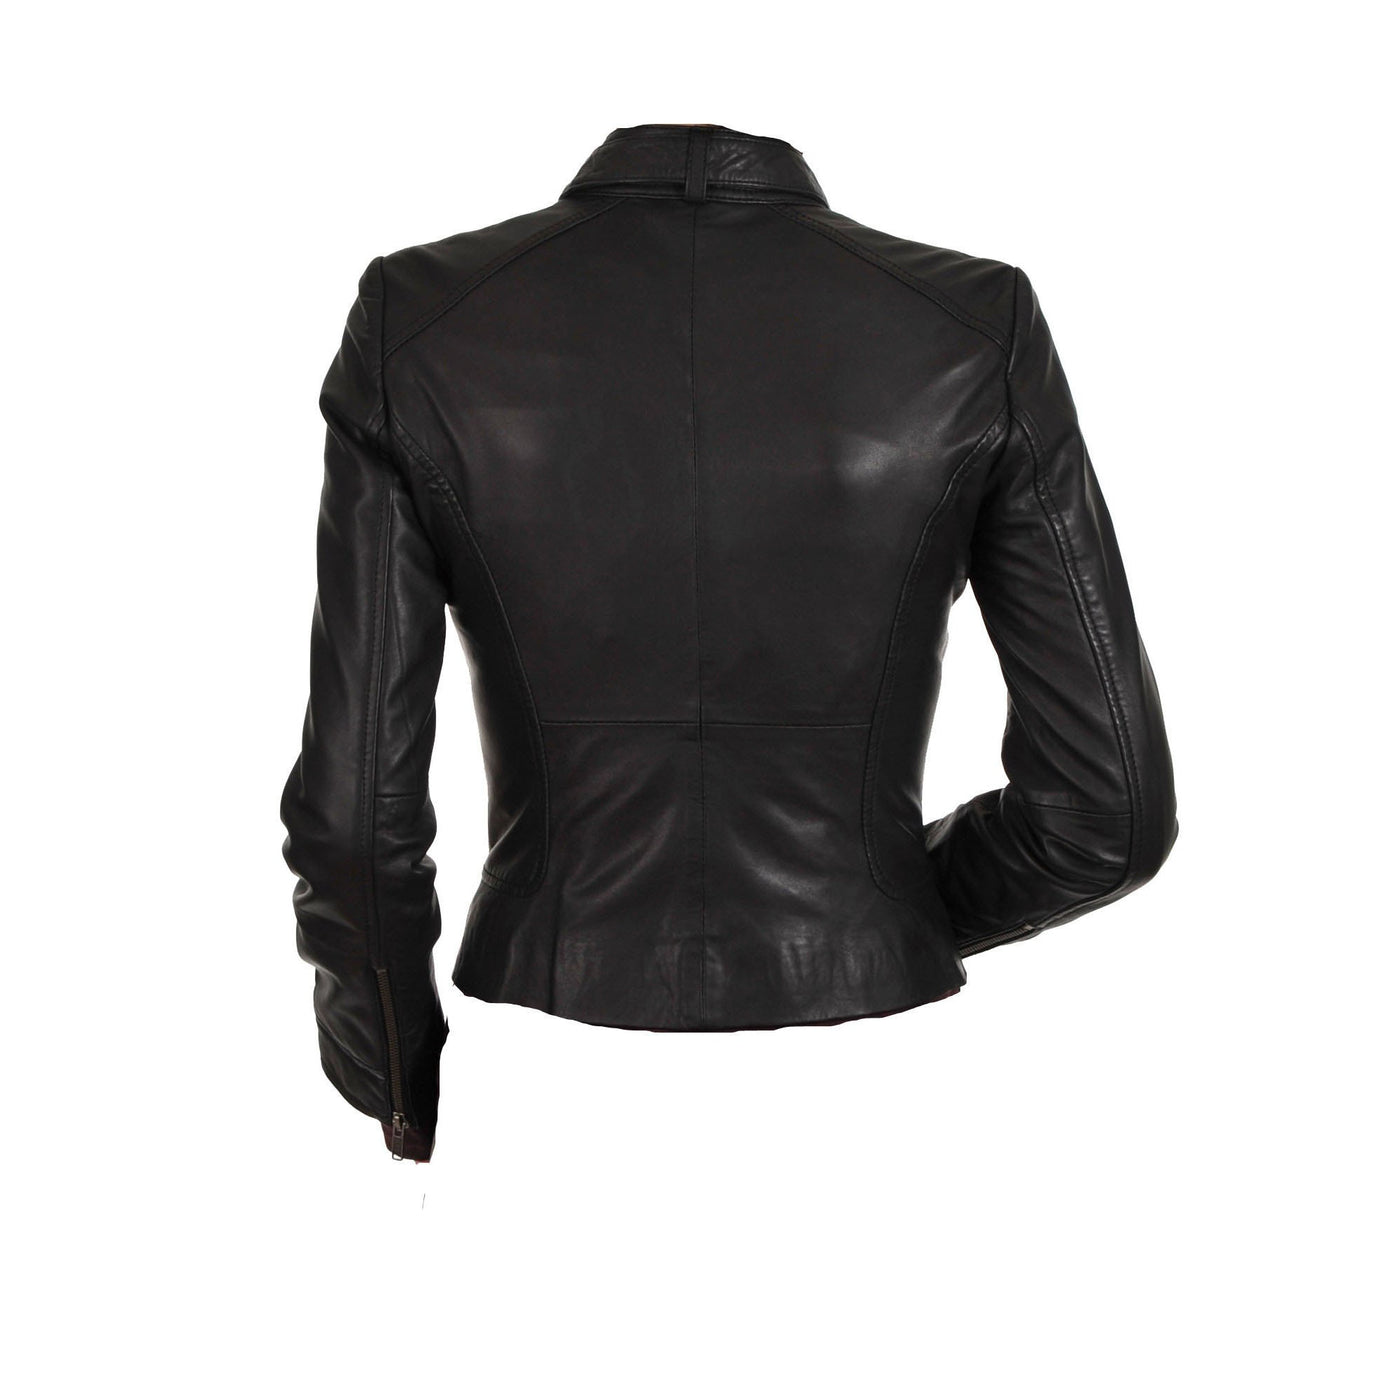 Women's black leather jacket with collar belt - Lusso Leather - 2